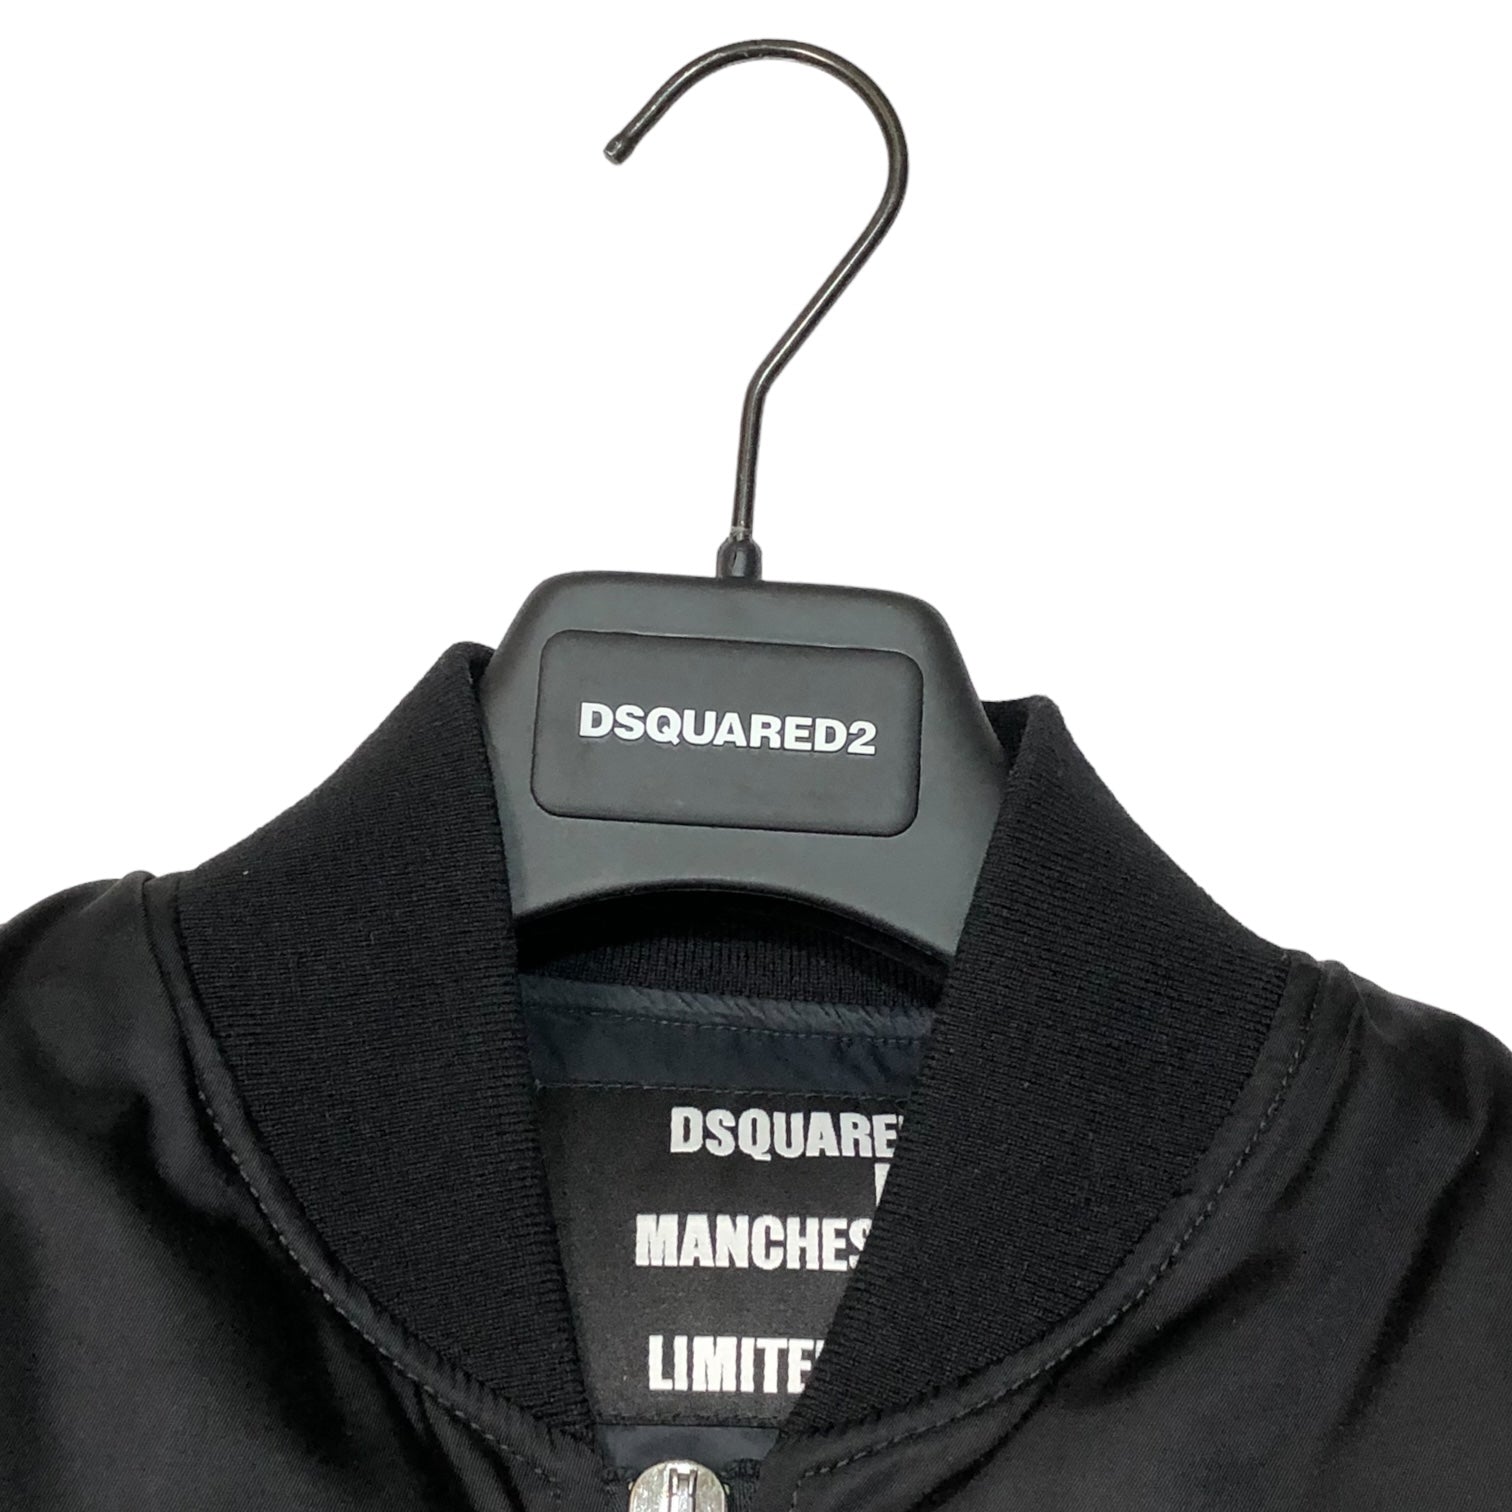 DSQUARED2(ディースクエアード) 23SS Manchester City Bomber jacket 